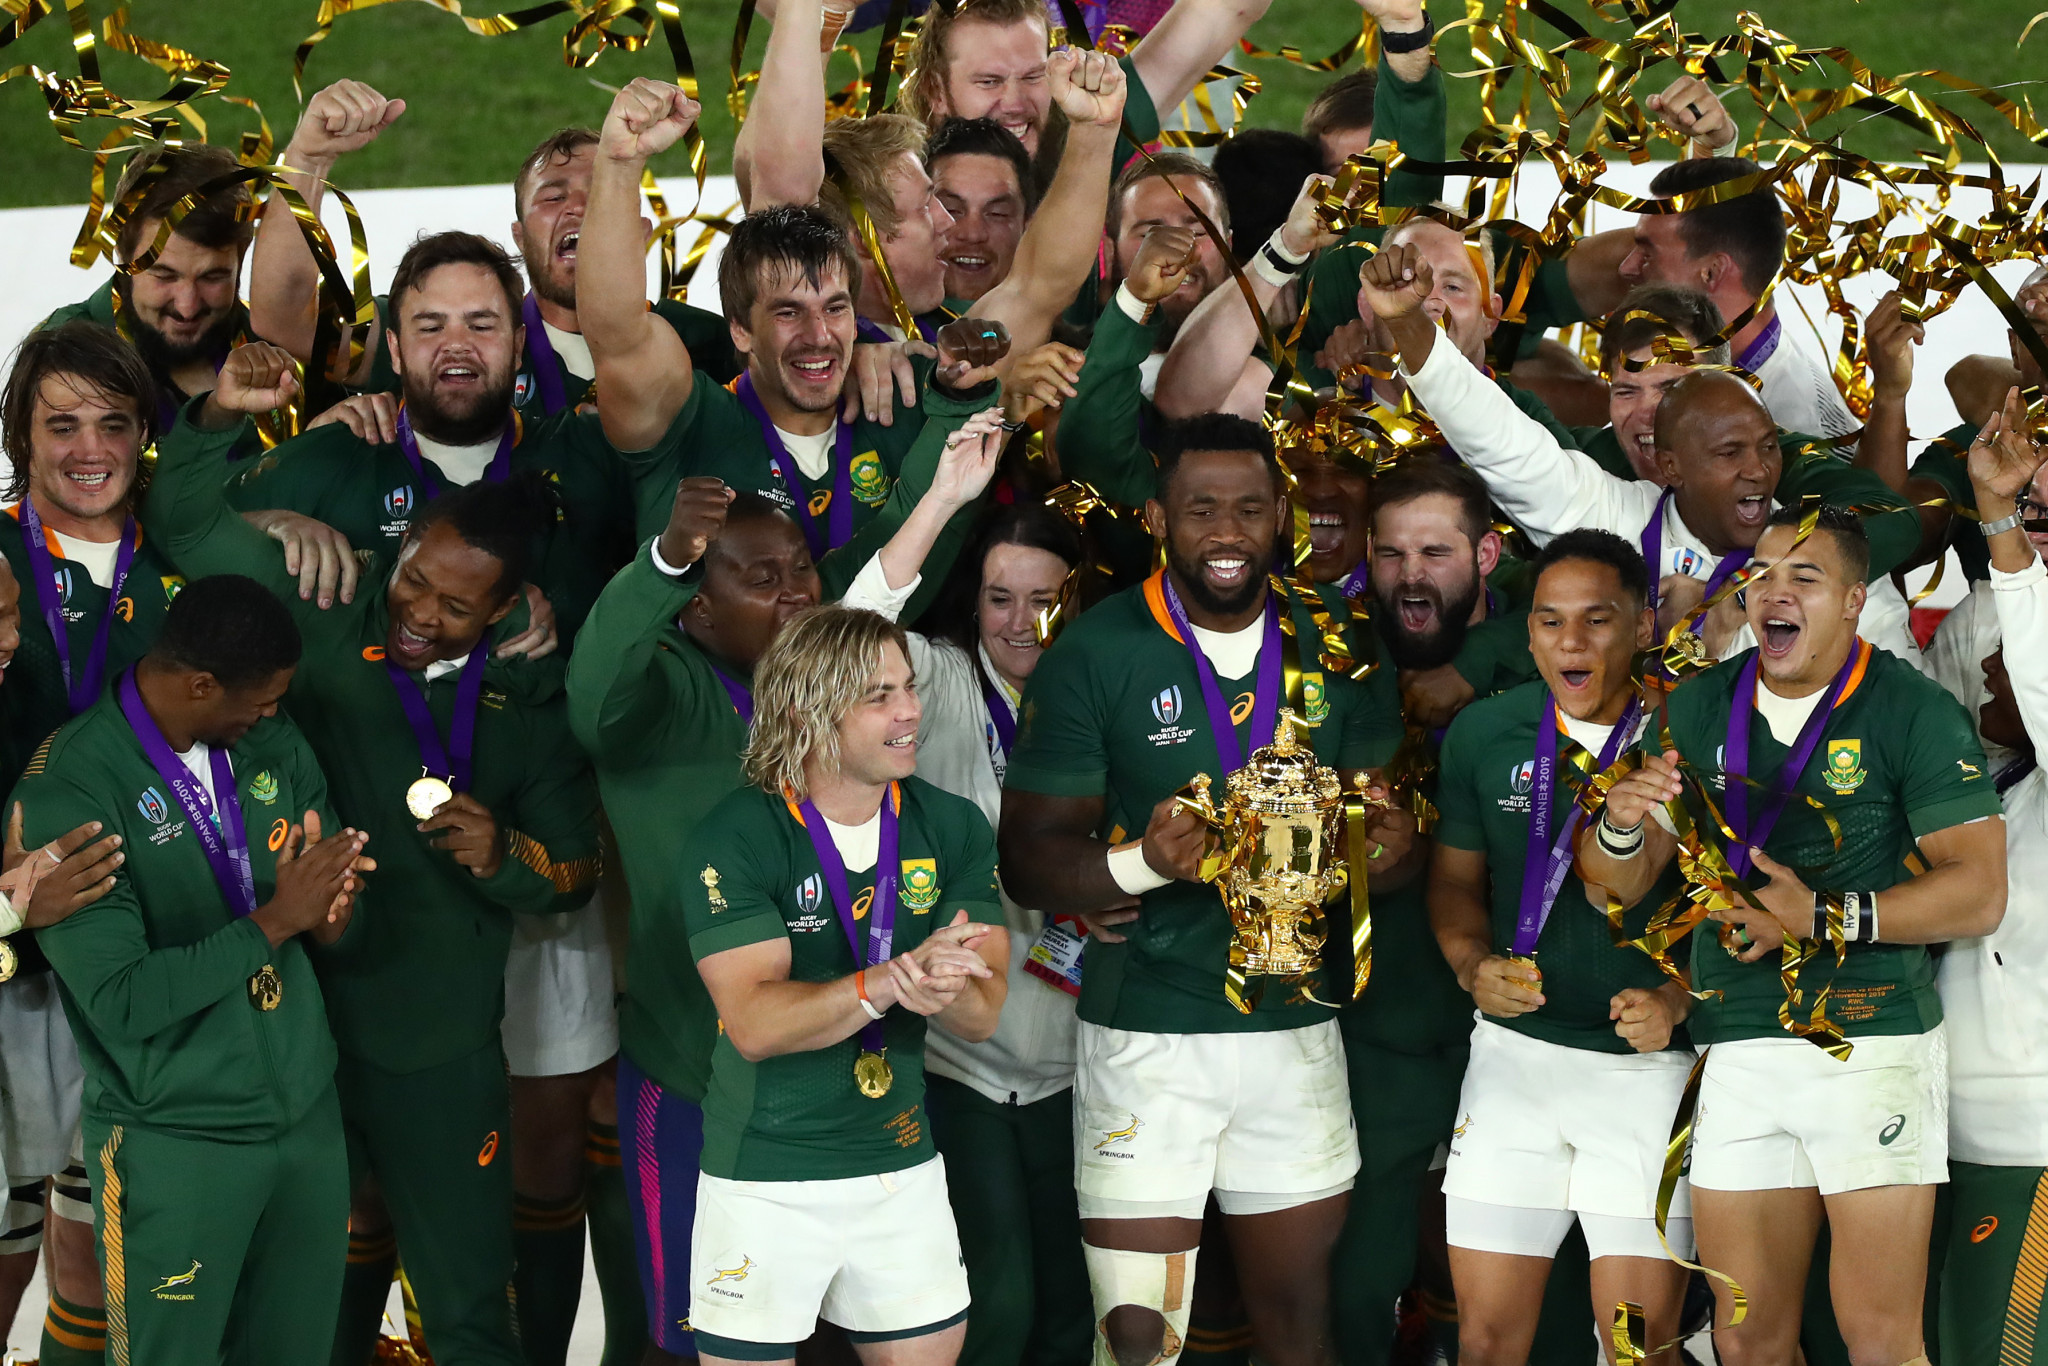 Rugby World Cup 2019 breaks new ground in social and digital content